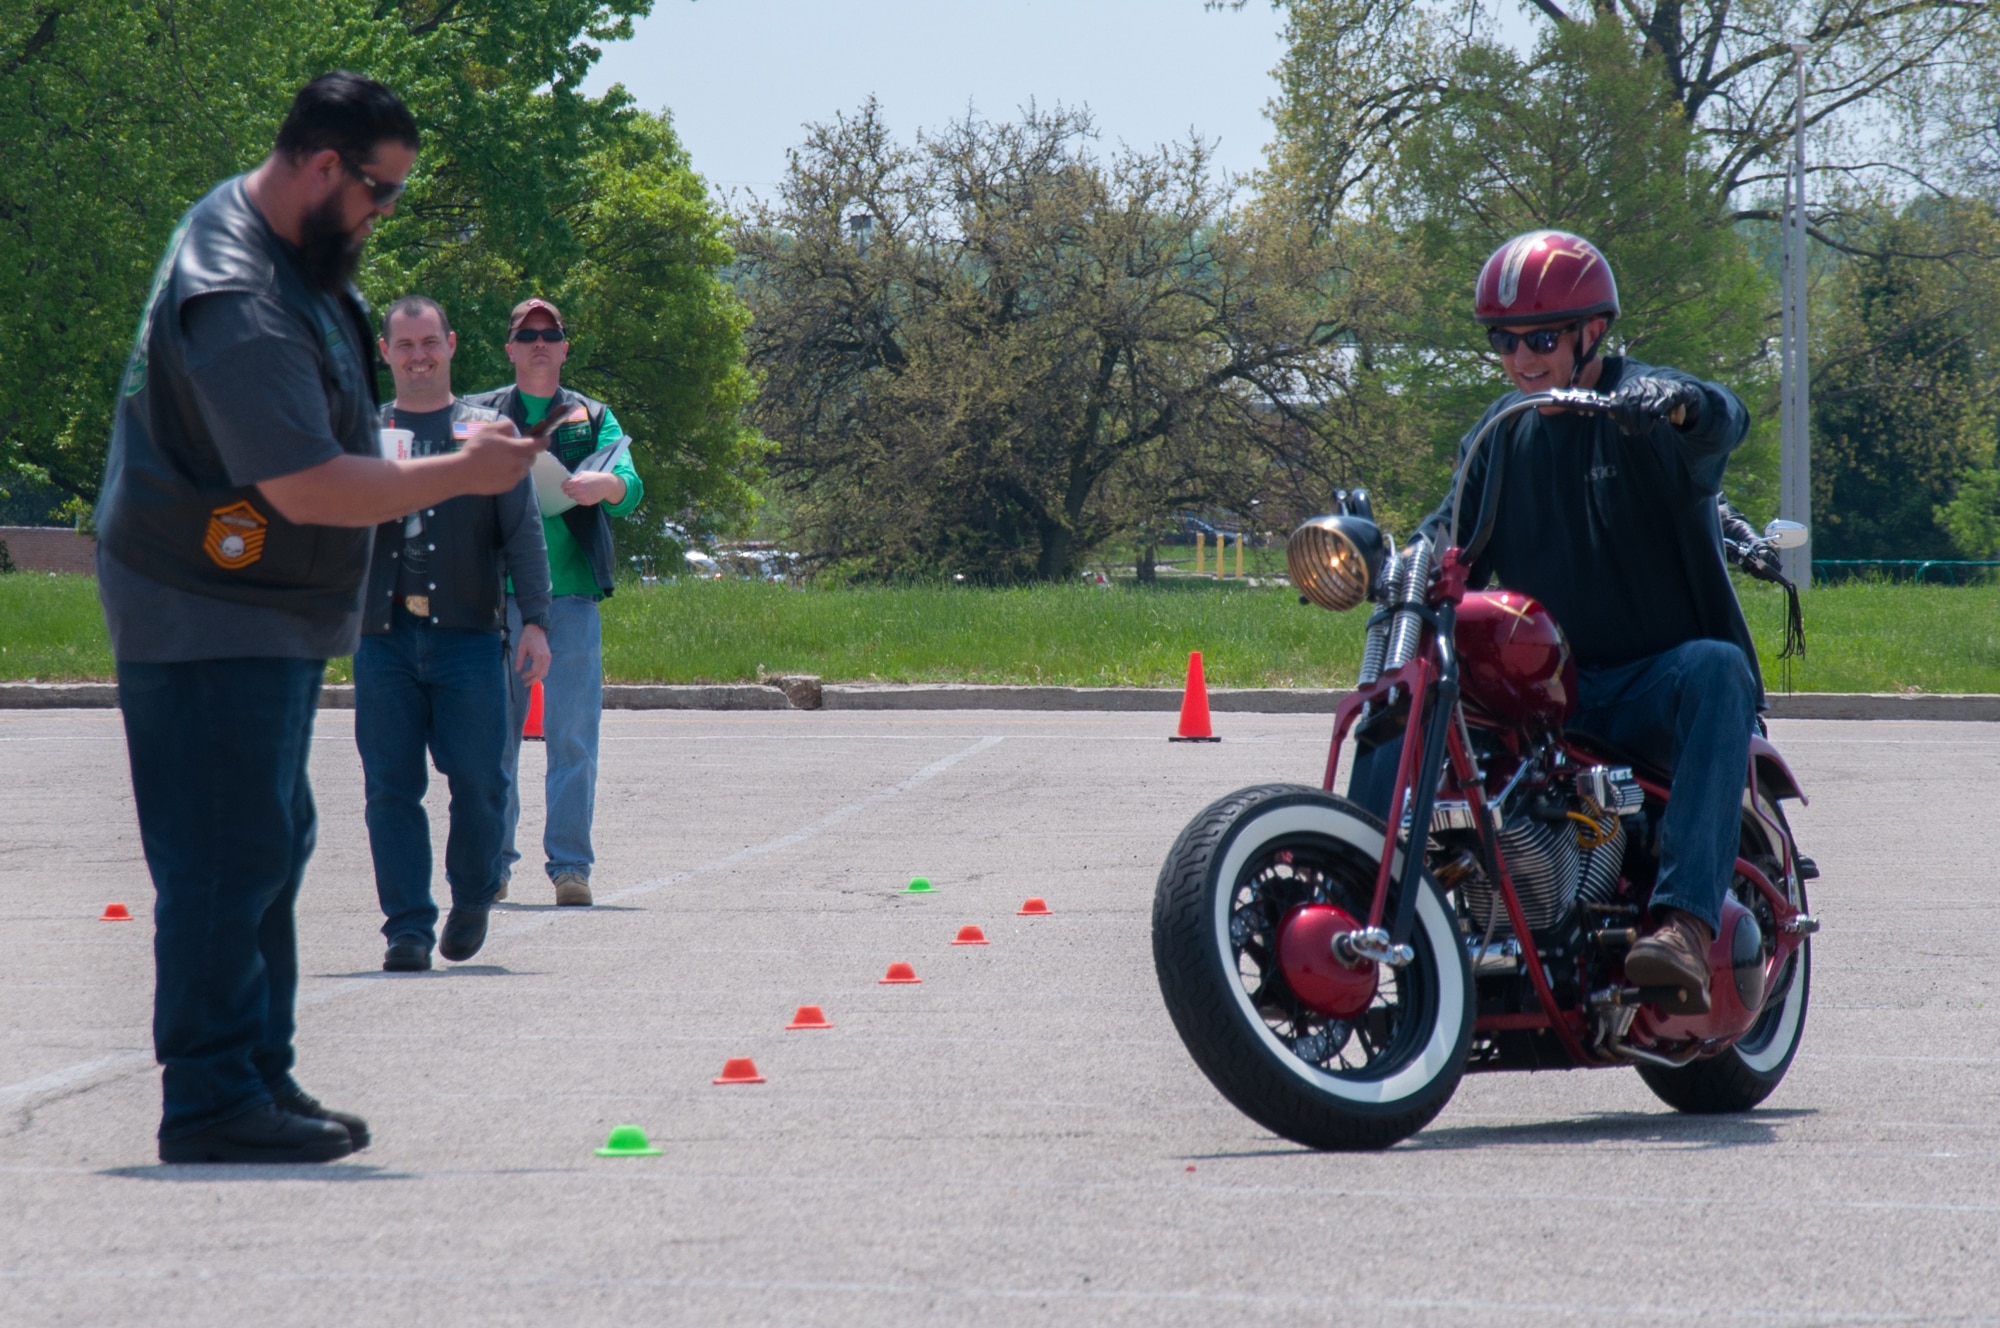 A rider competes in a slow ride contest as part of Wright-Patterson's Motorcycle Safety Day 2018.